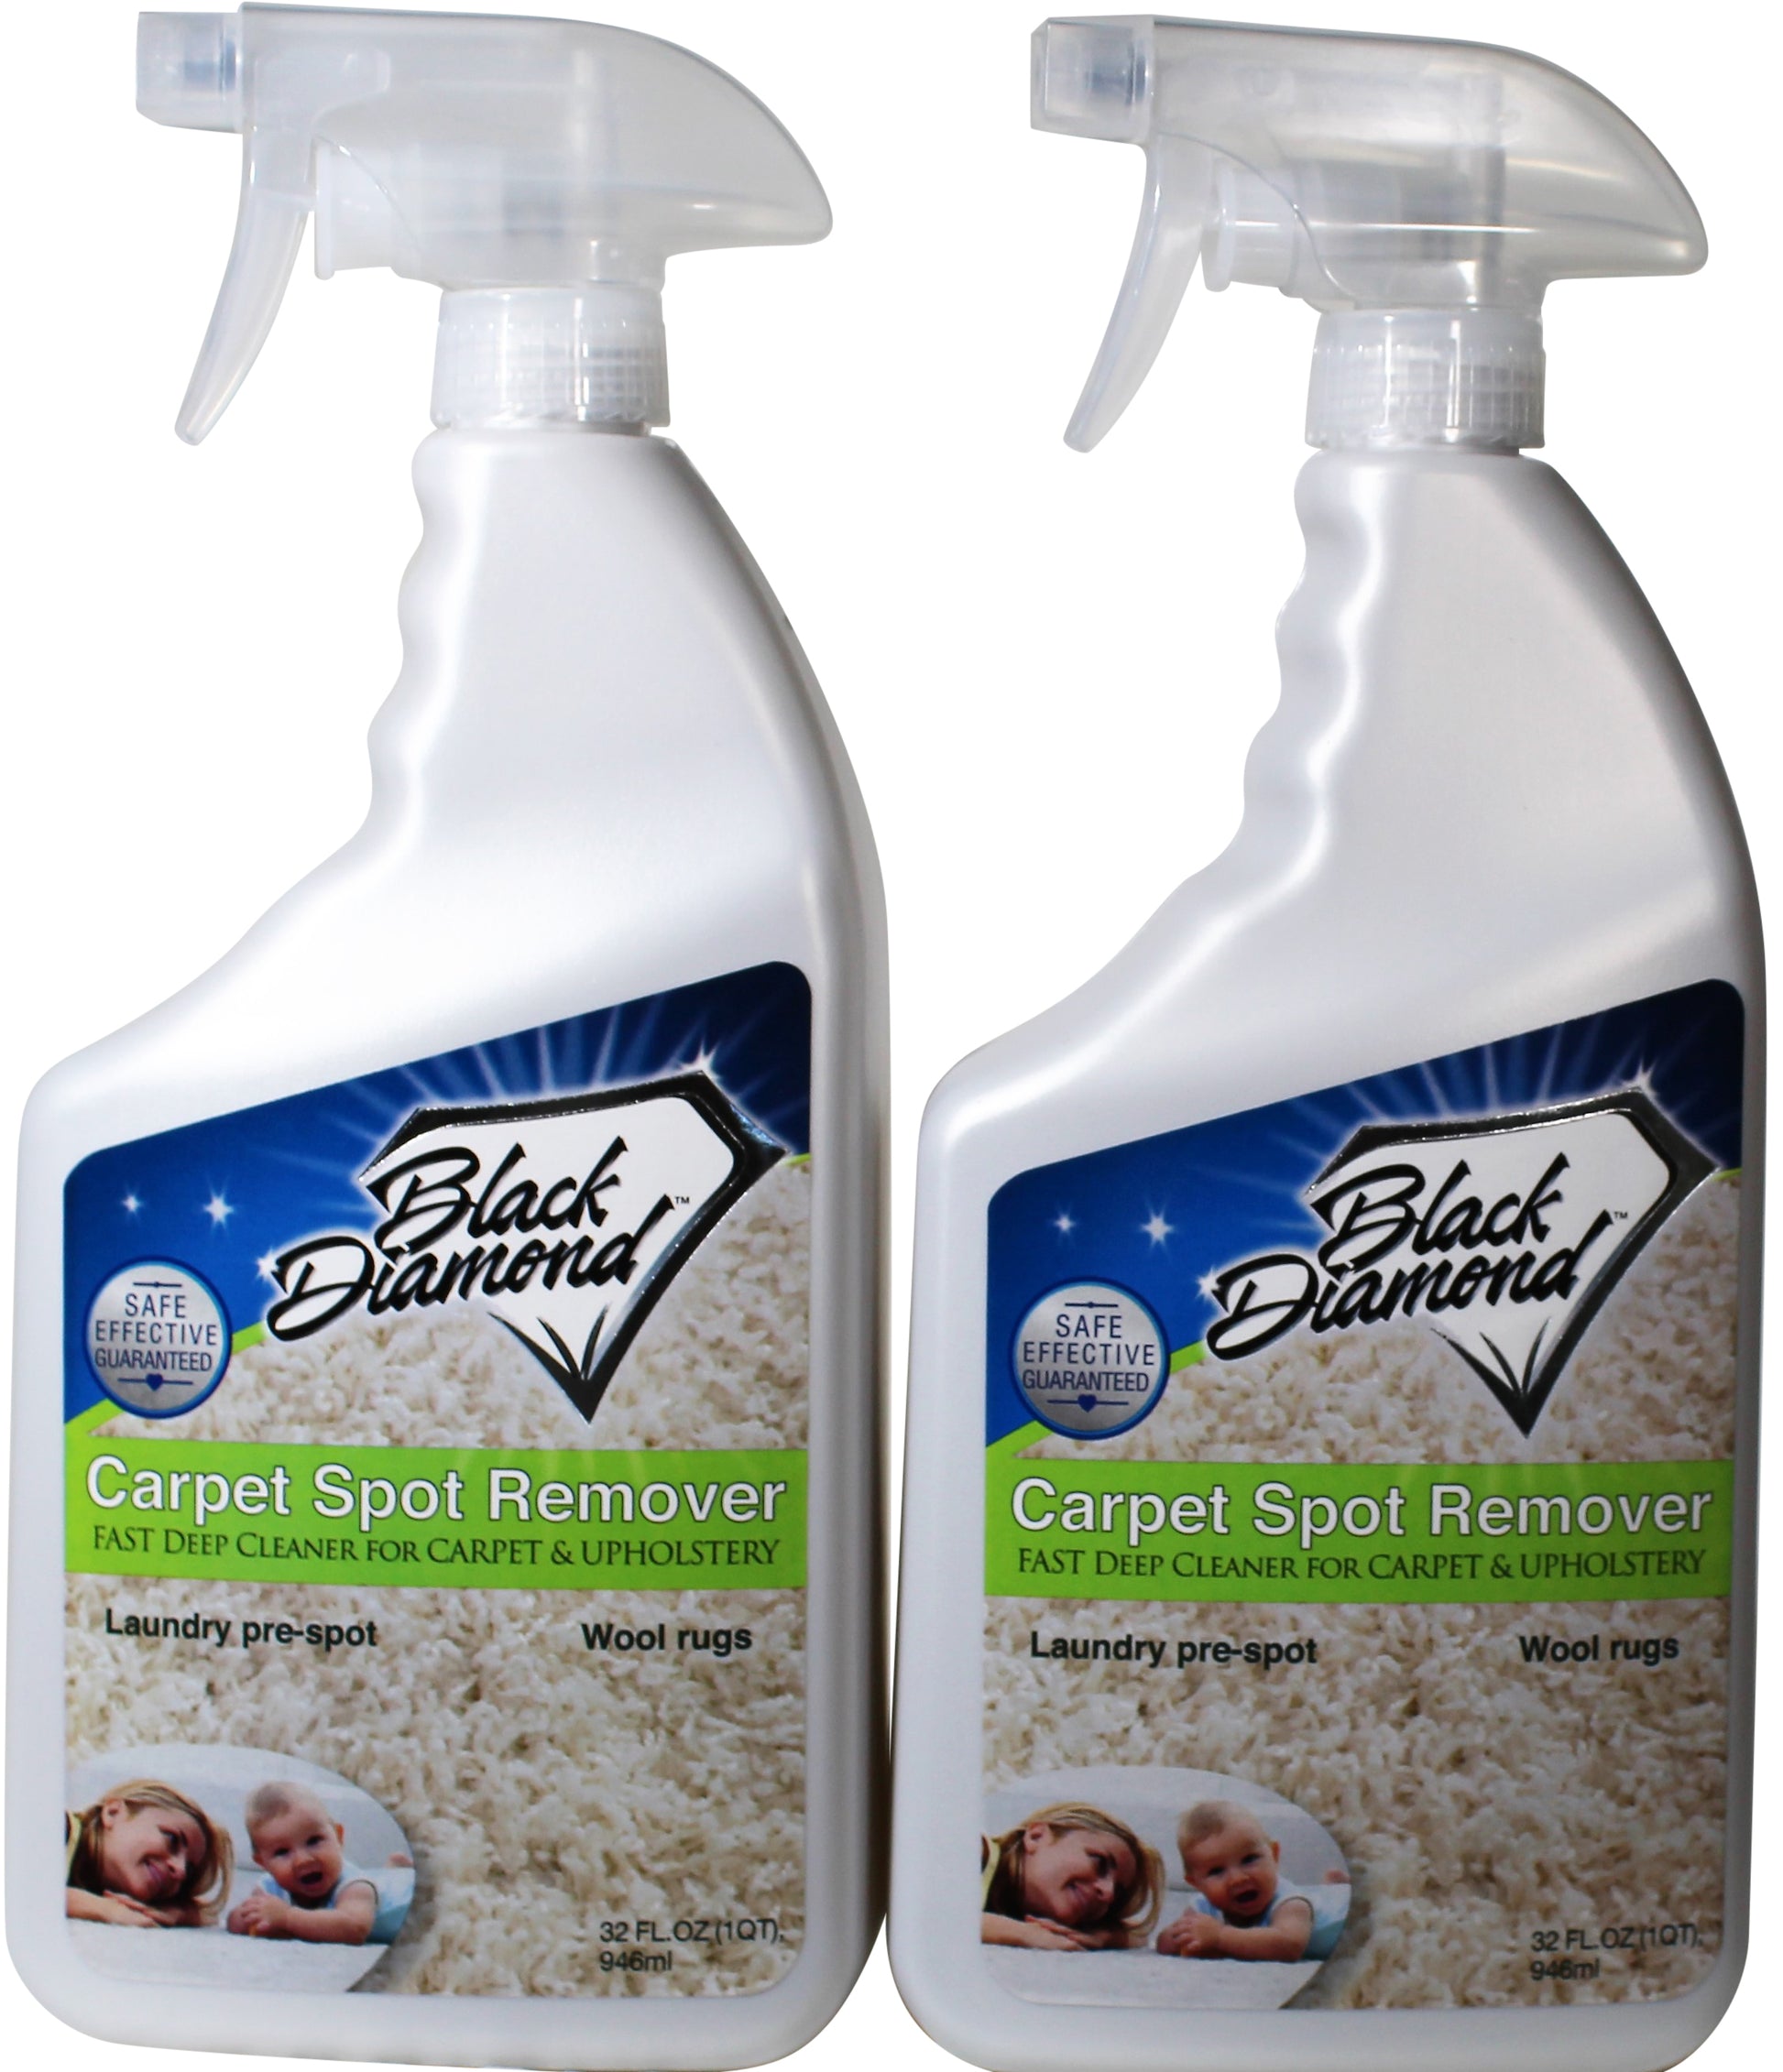  Black Diamond Stoneworks Carpet & Upholstery Cleaner: This Fast  Acting Deep Cleaning Spot & Stain Remover Spray Also Works Great on Rugs,  Couches and Car Seats. (1-Quart) : Health & Household